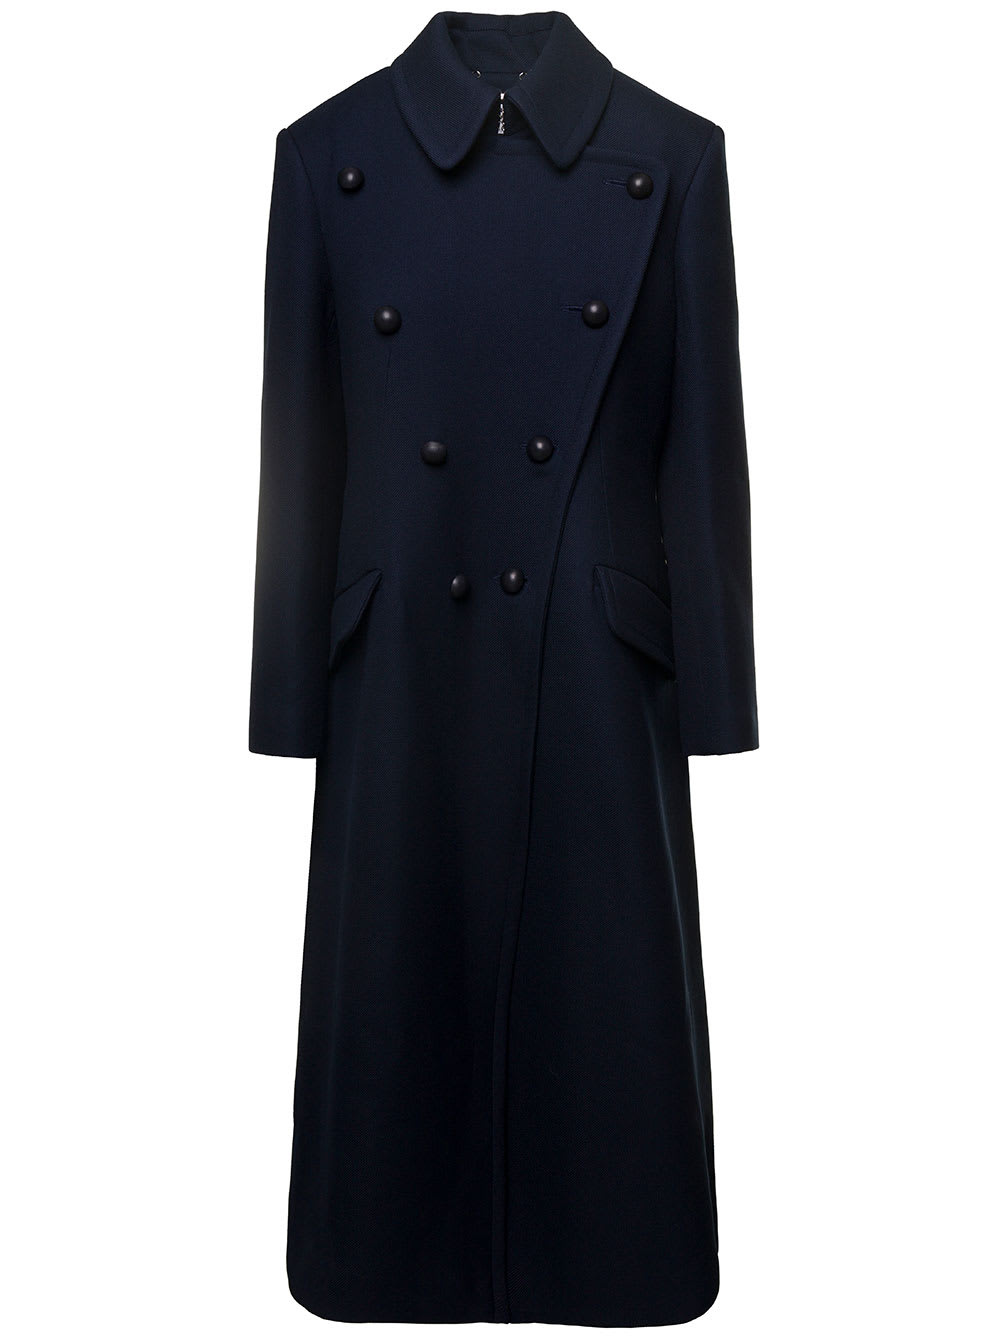 CHLOÉ BLUE LONG DOUBLE-BREASTED COAT WITH FLAP POCKETS IN WOOL WOMAN